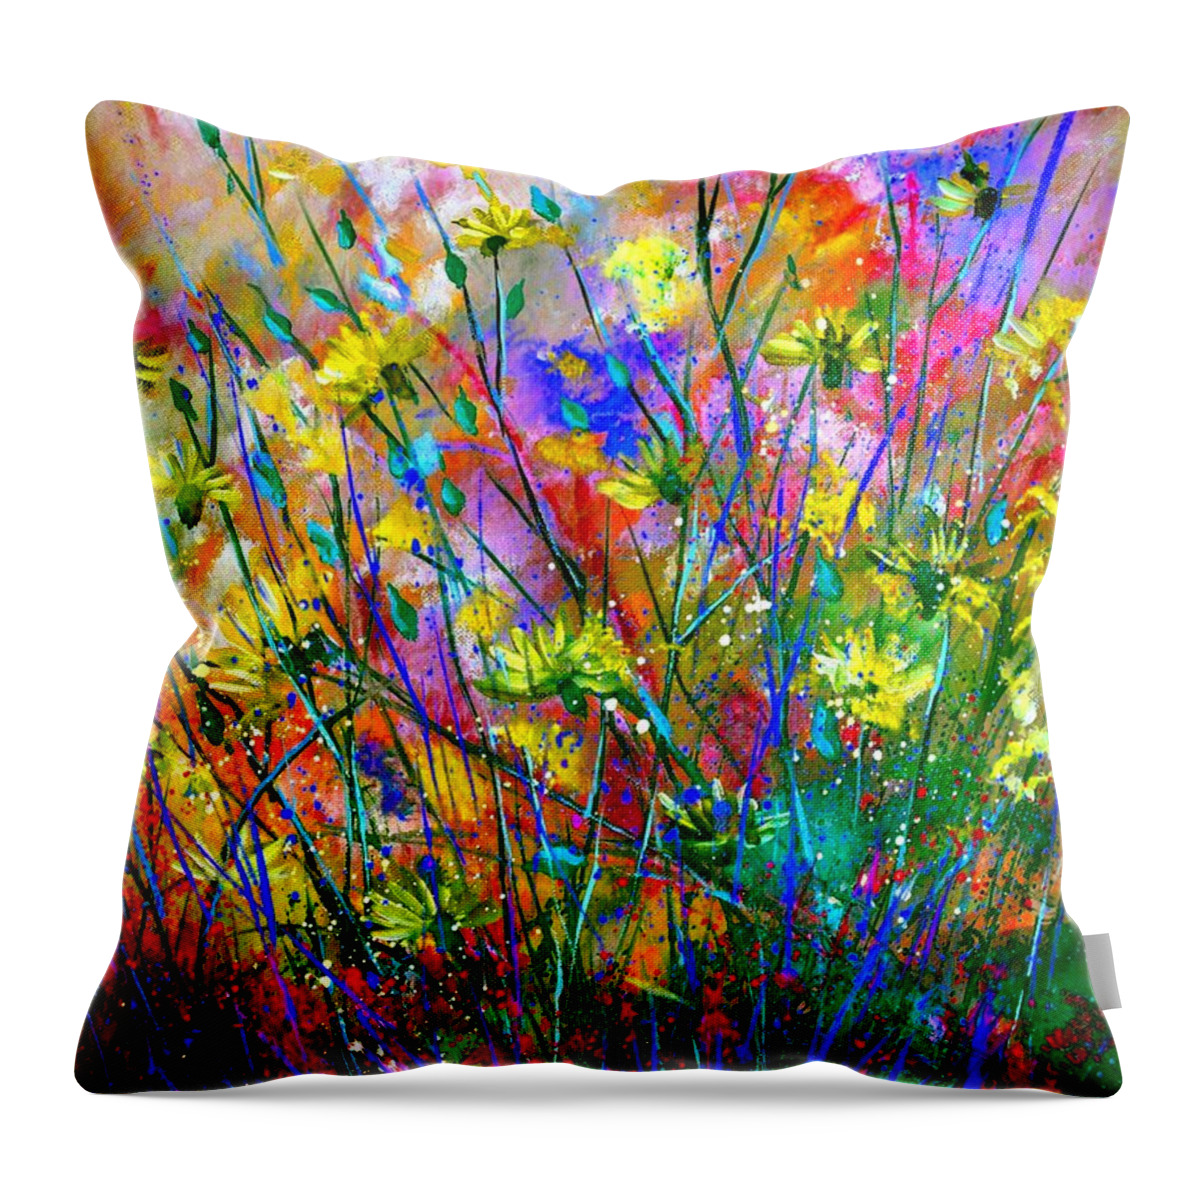 Flowers Throw Pillow featuring the painting Wild Flowers by Pol Ledent